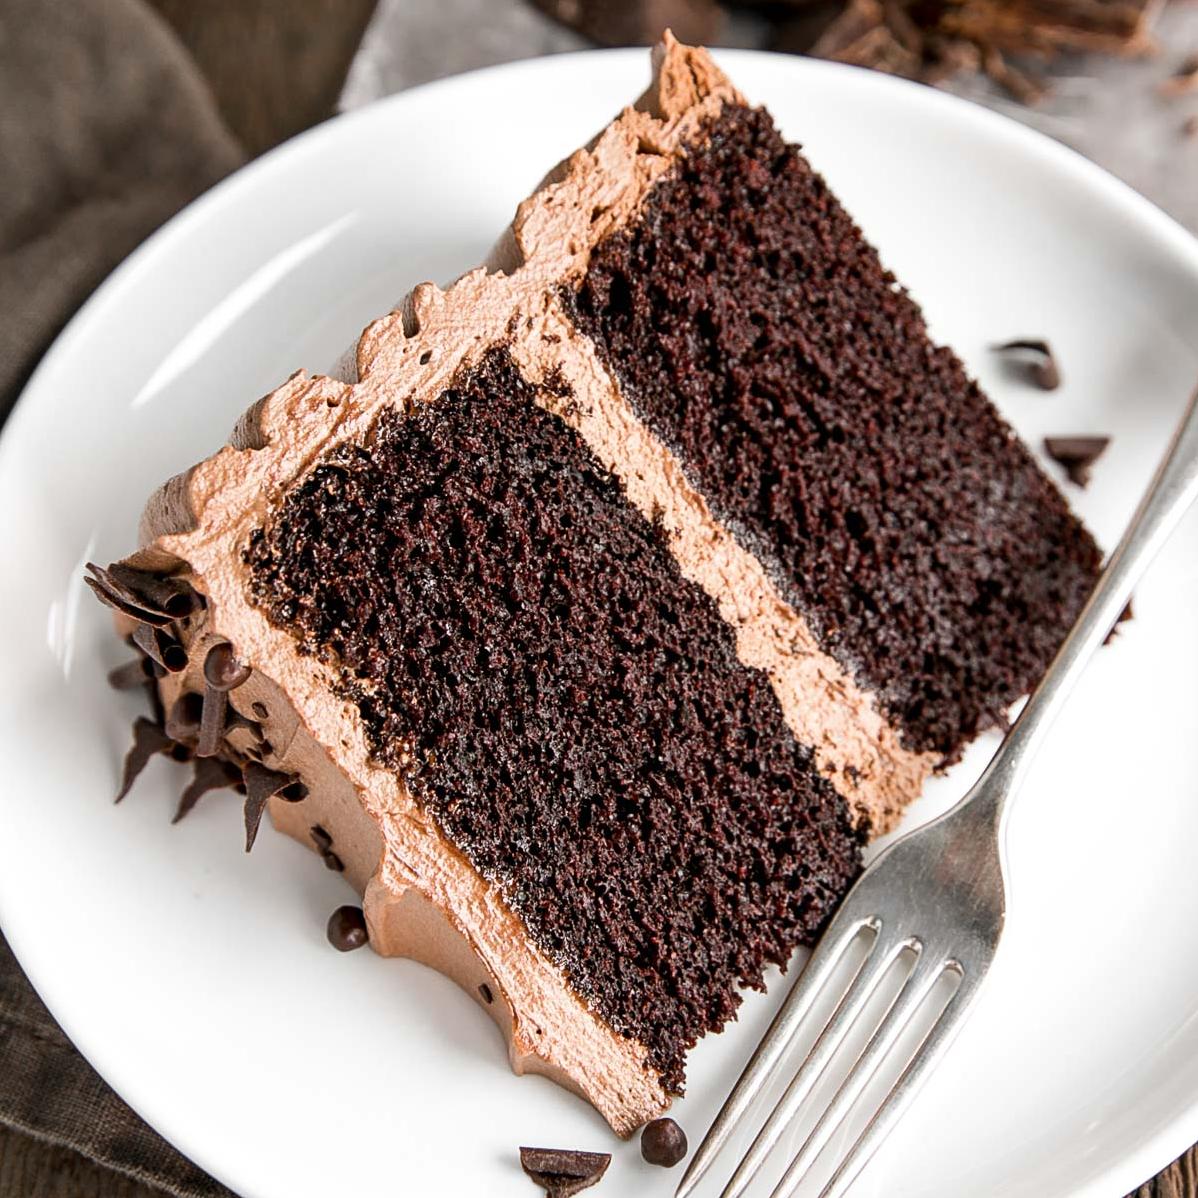  A warm cup of coffee pairs perfectly with this cake